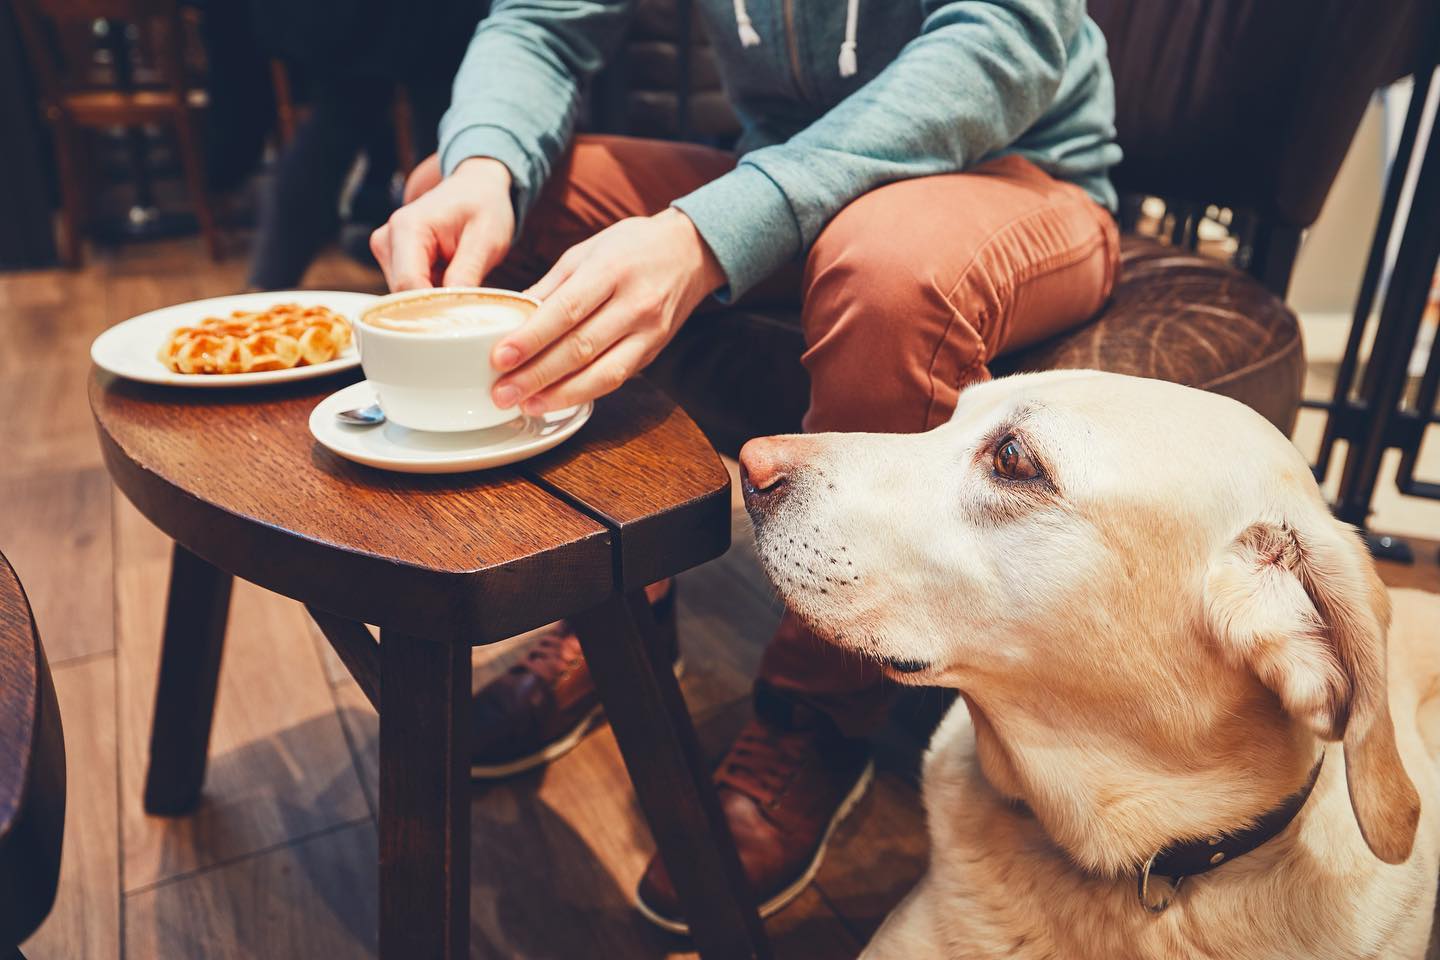 Pet-Friendly Restaurants in Nevada 🐶 From sunbathing spots on patios to dog-friendly treats and carefully crafted menu items, the goodest boys and girls will agree that these are among the best destinations for you and your pups to dine in Nevada. Check out the list at FabulousNevada.com.